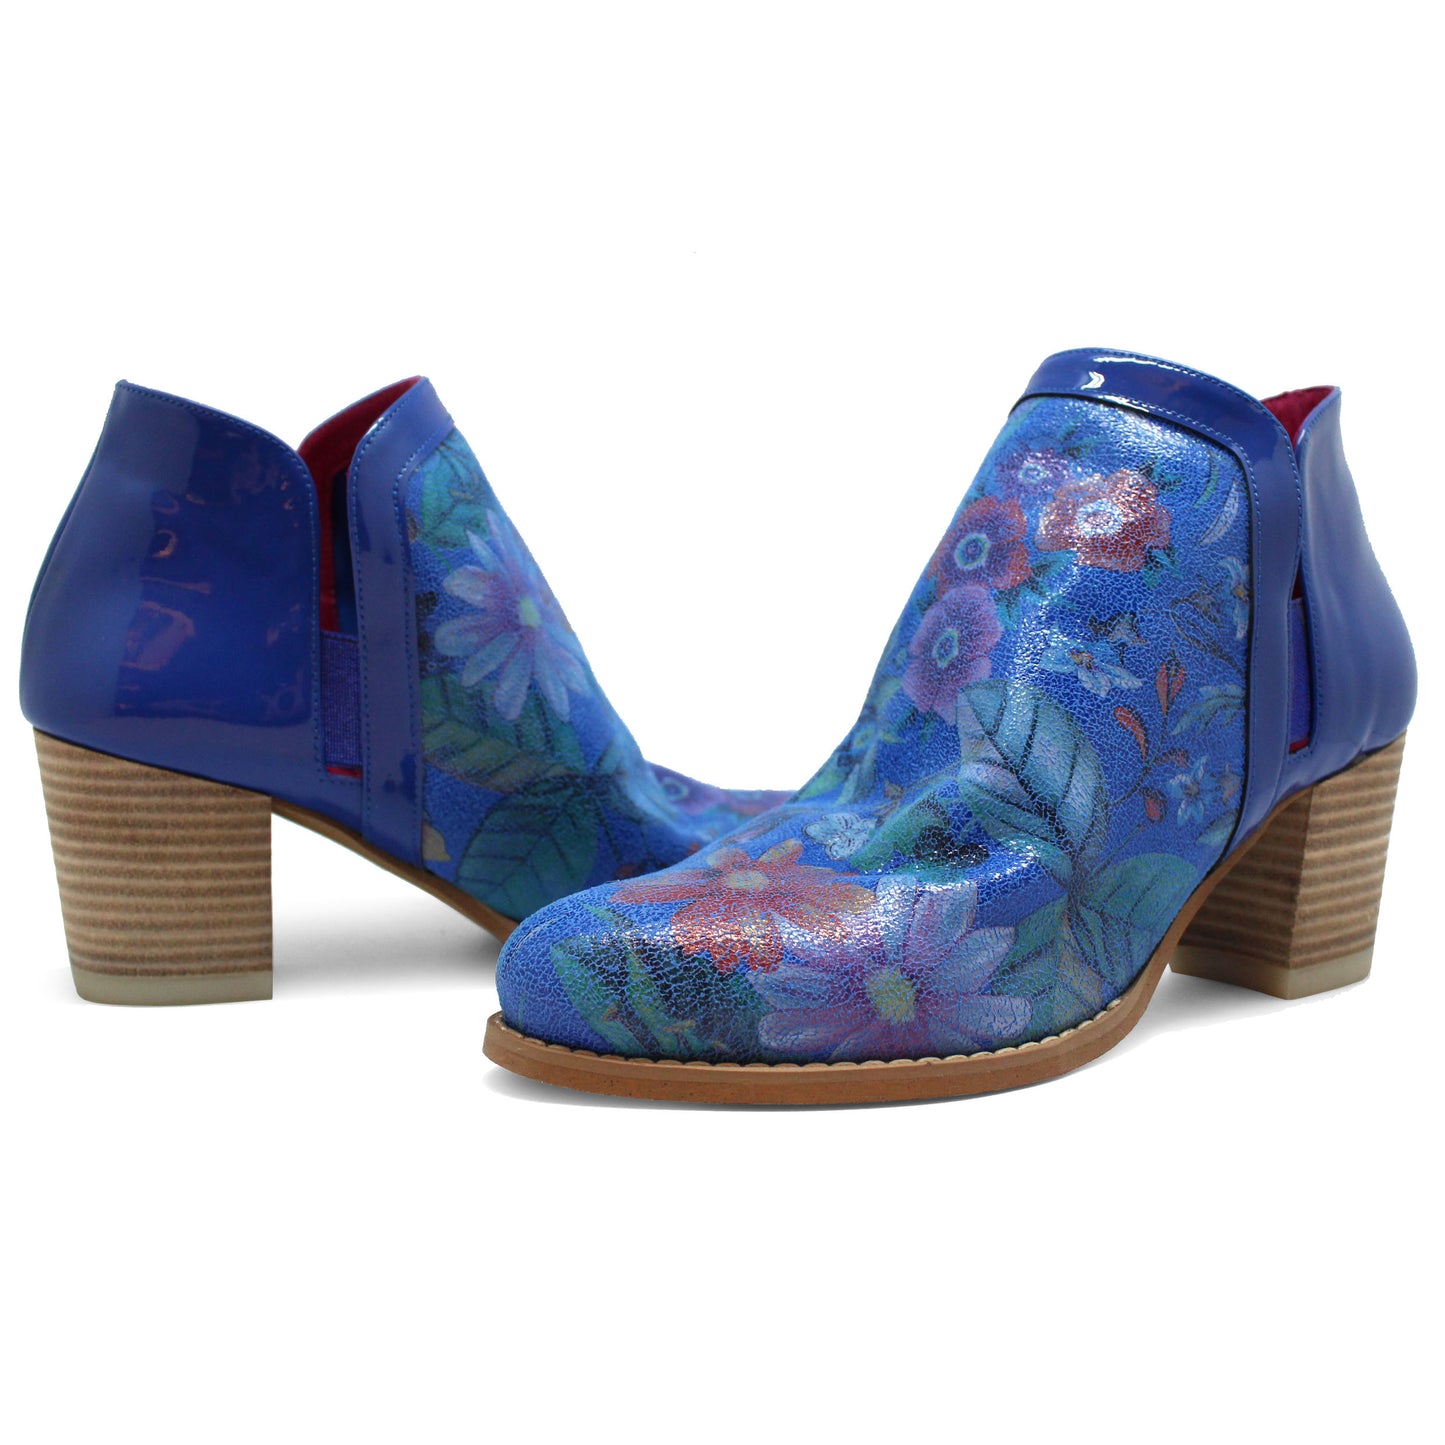 Plume - Blue Flower ankle boot